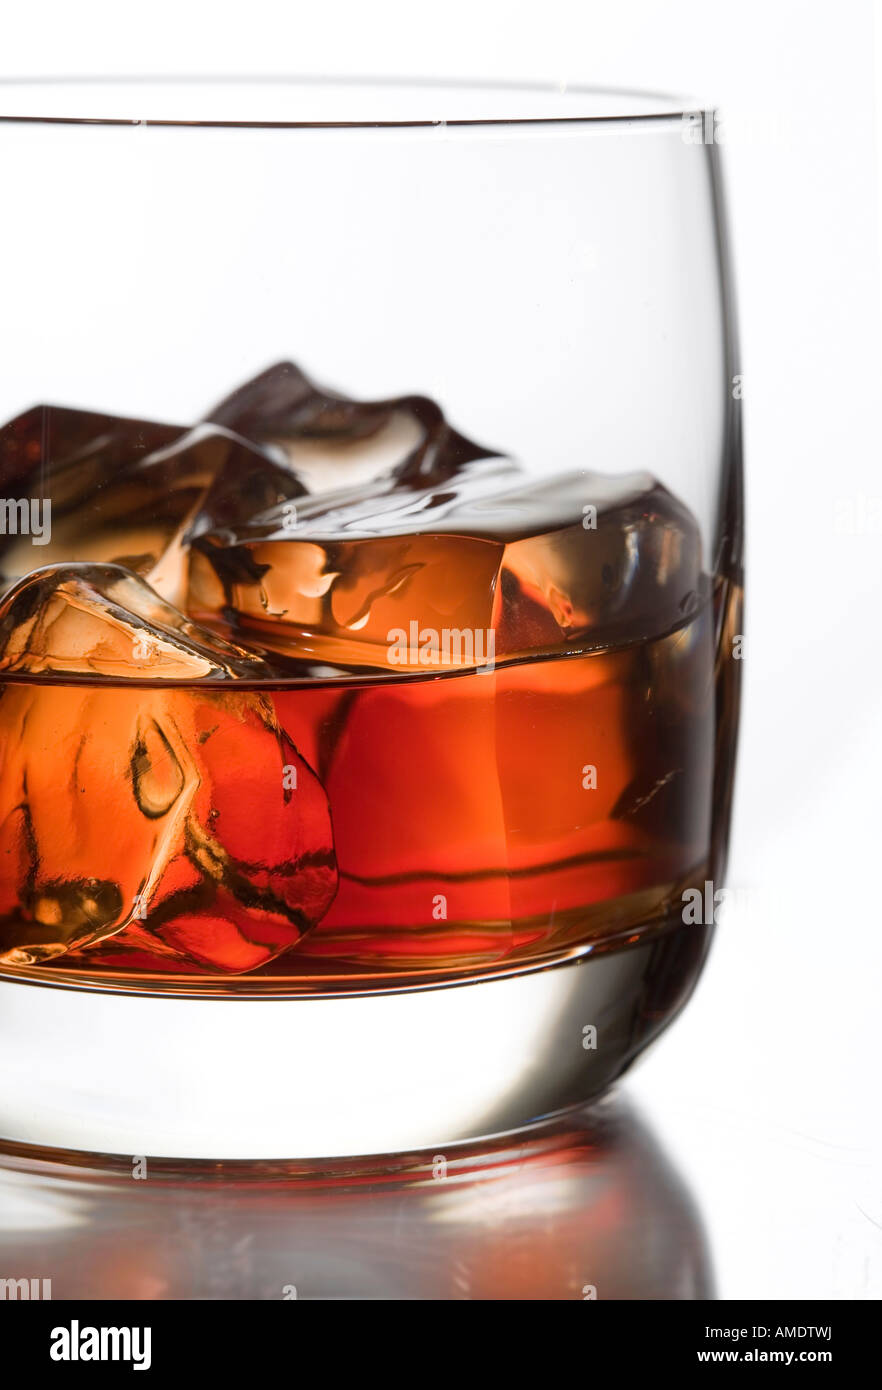 close up of a glass of bourbon whisky Stock Photo